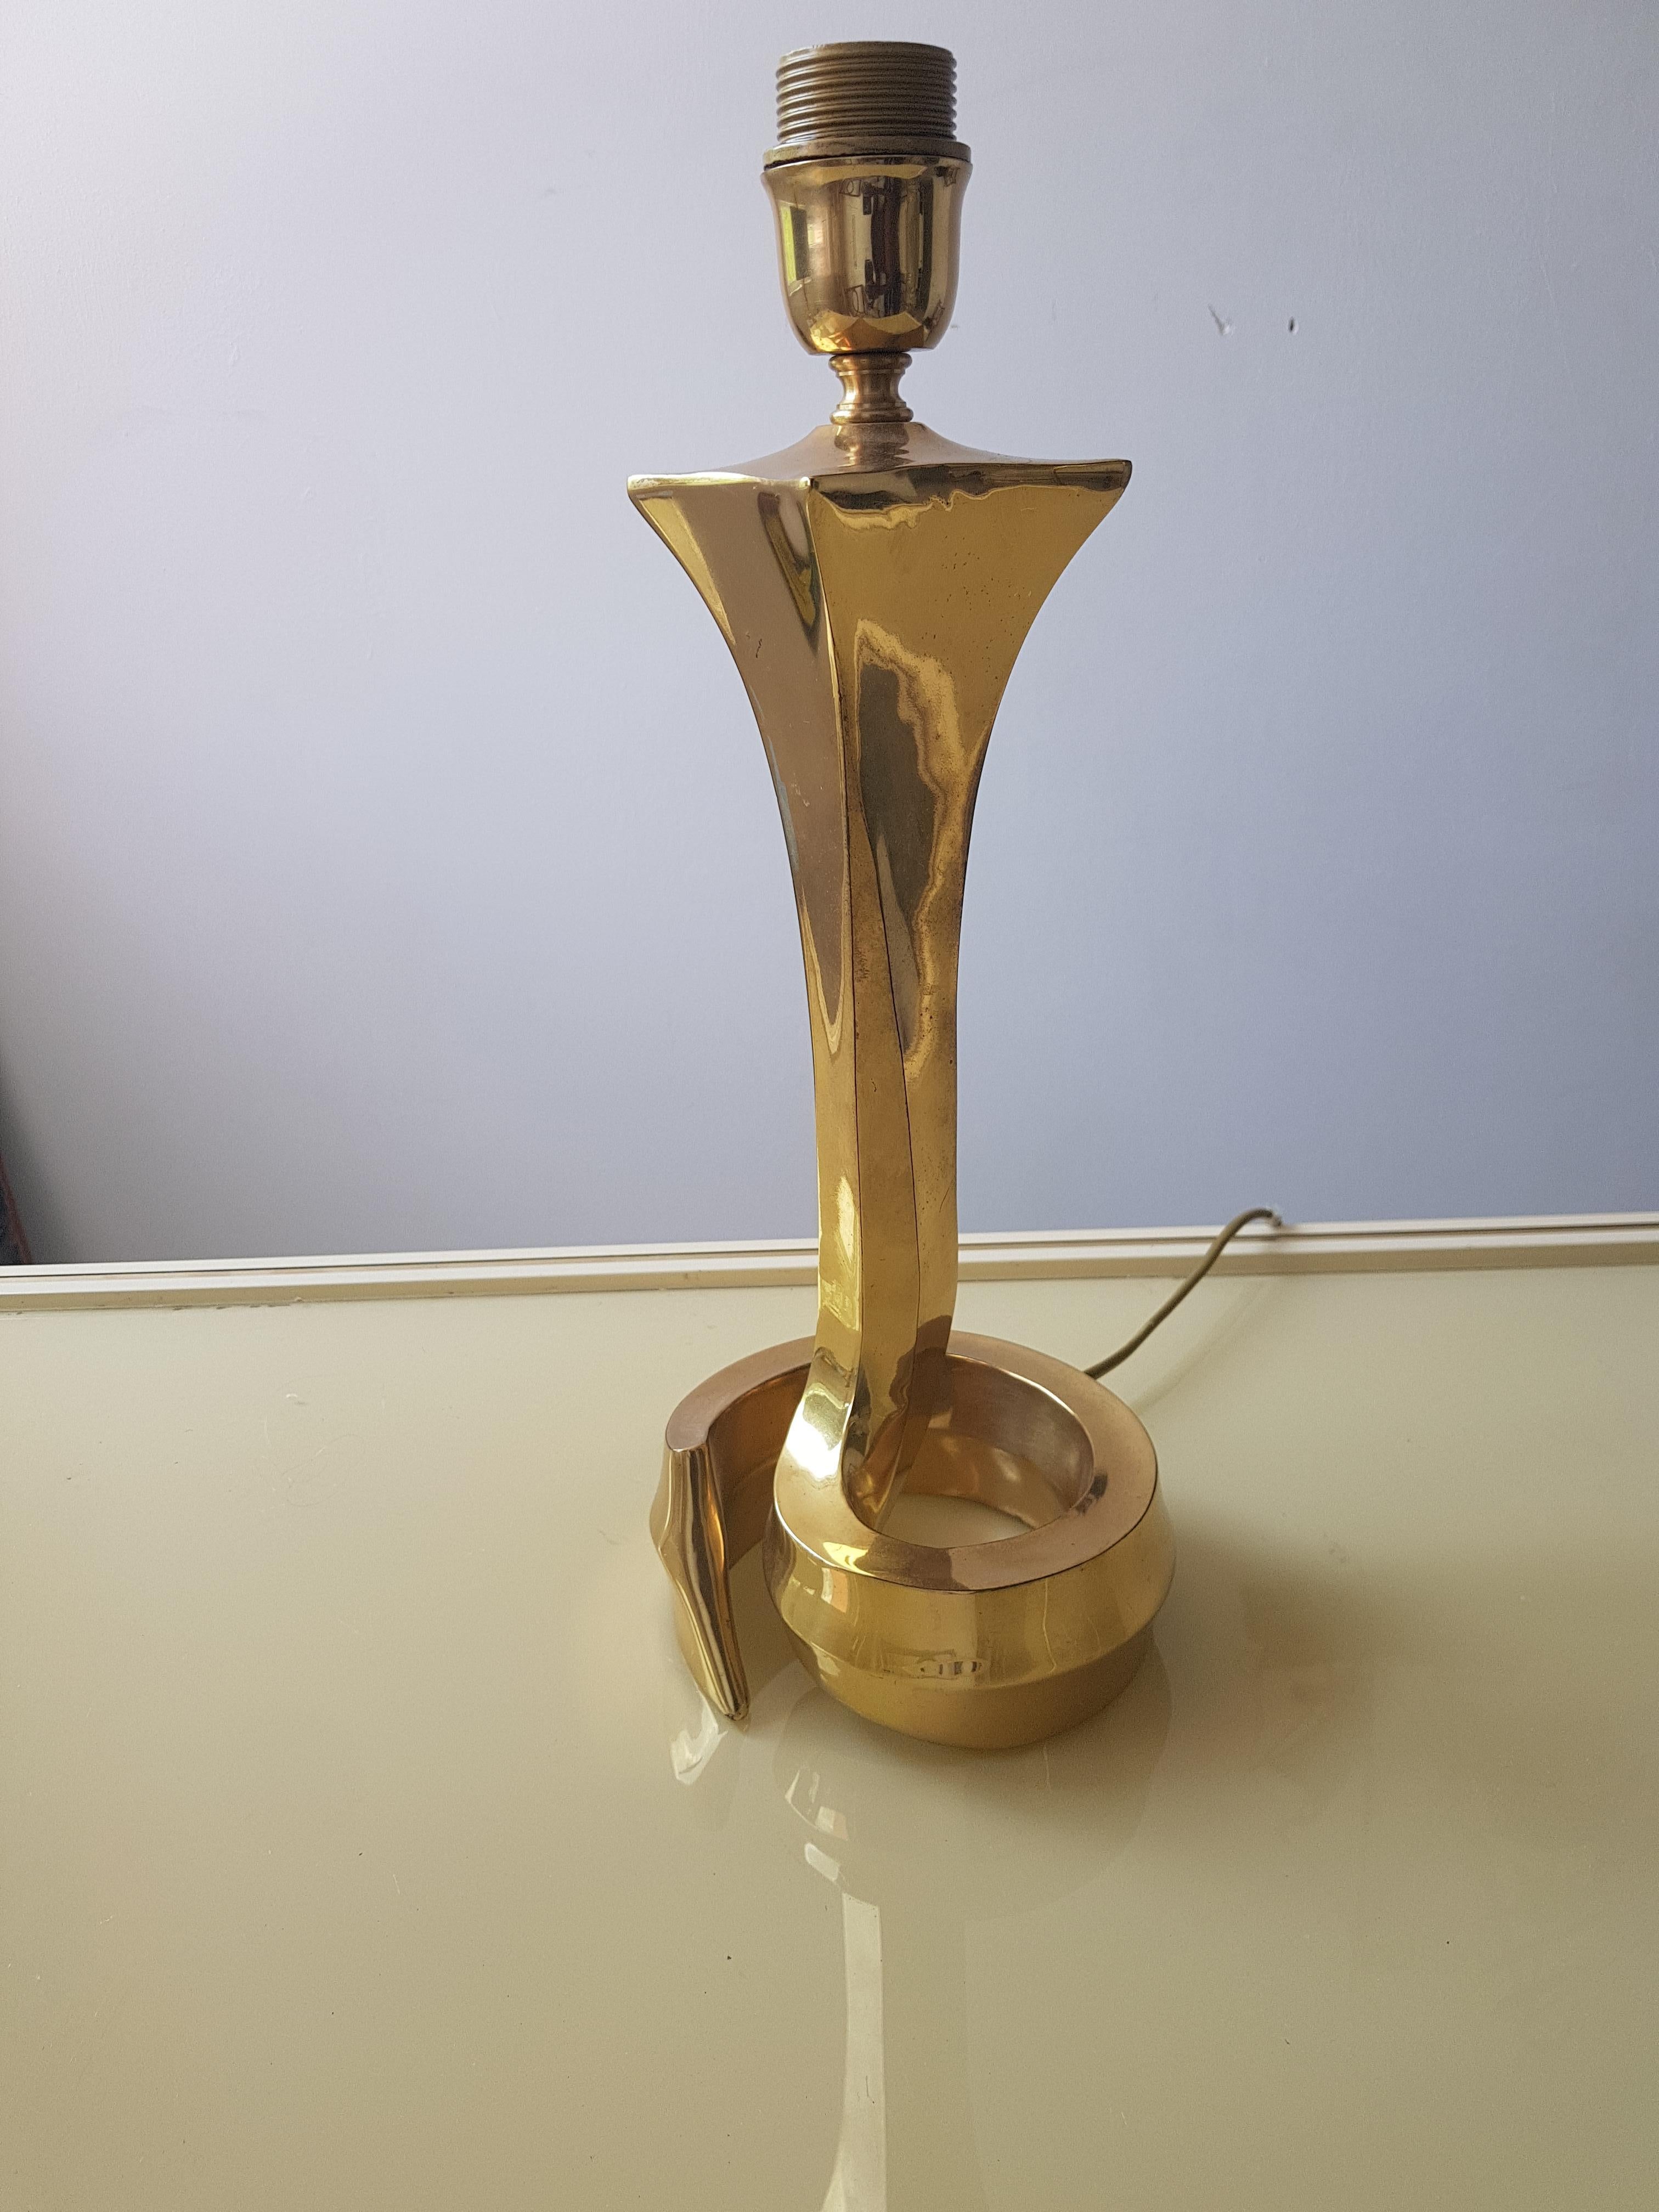 20th Century Vintage Hollywood Regency Brass Table Lamp in the style of Pierre Cardin, 1970s For Sale